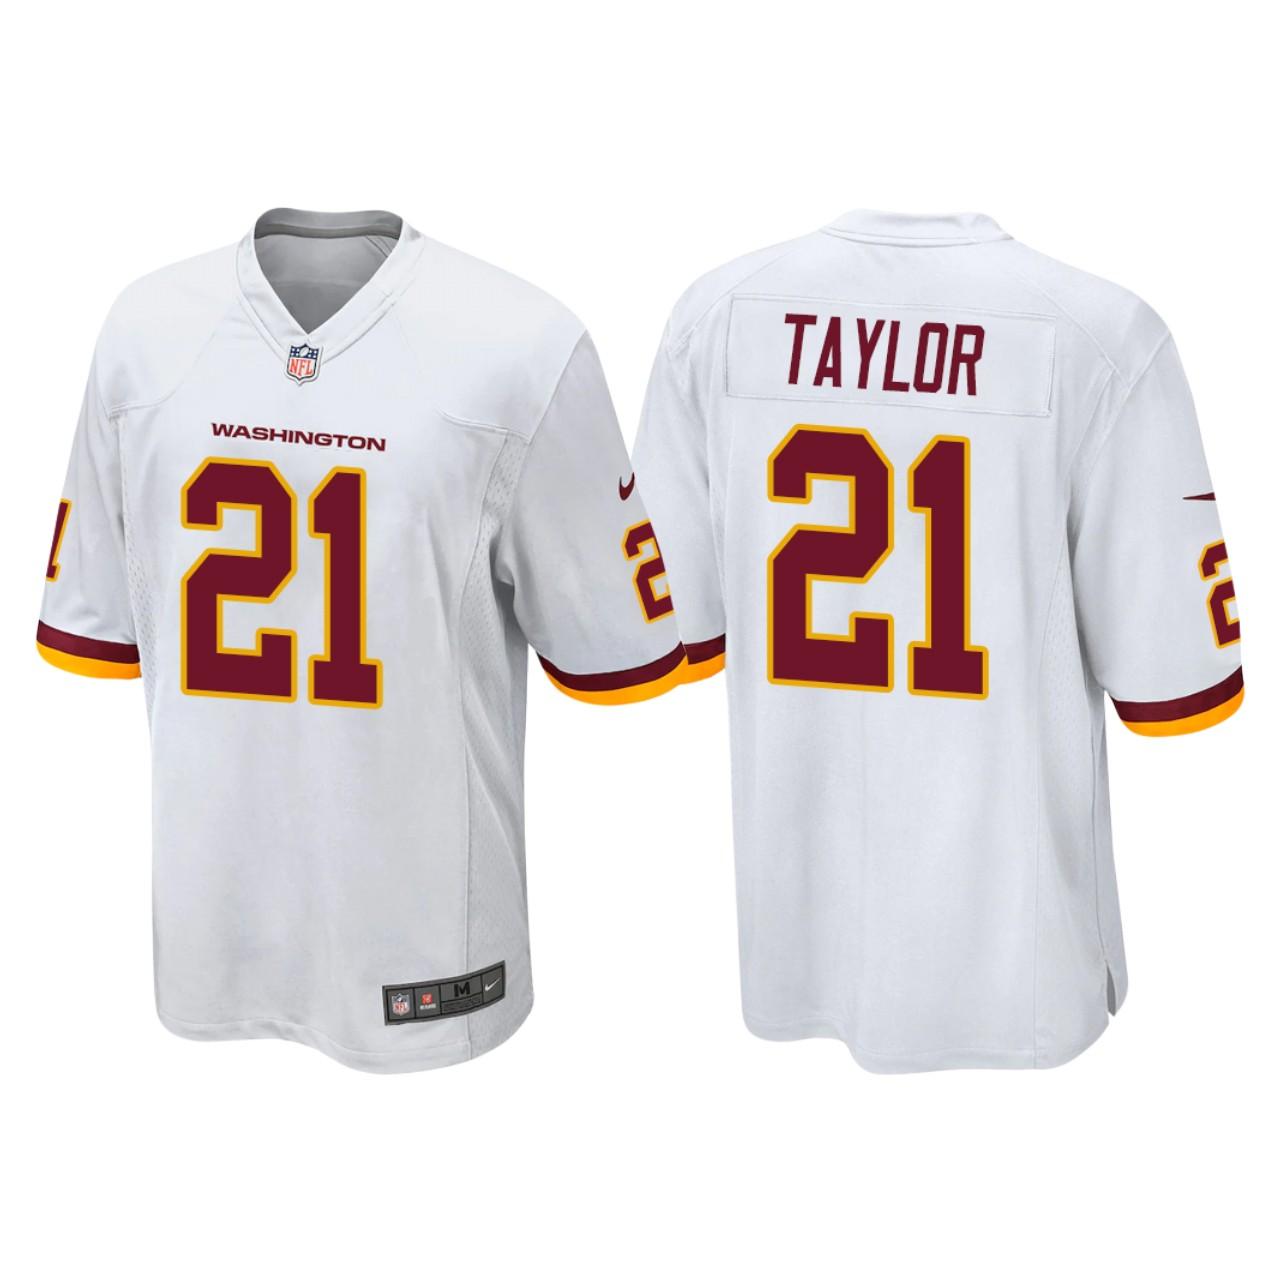 sean taylor limited jersey